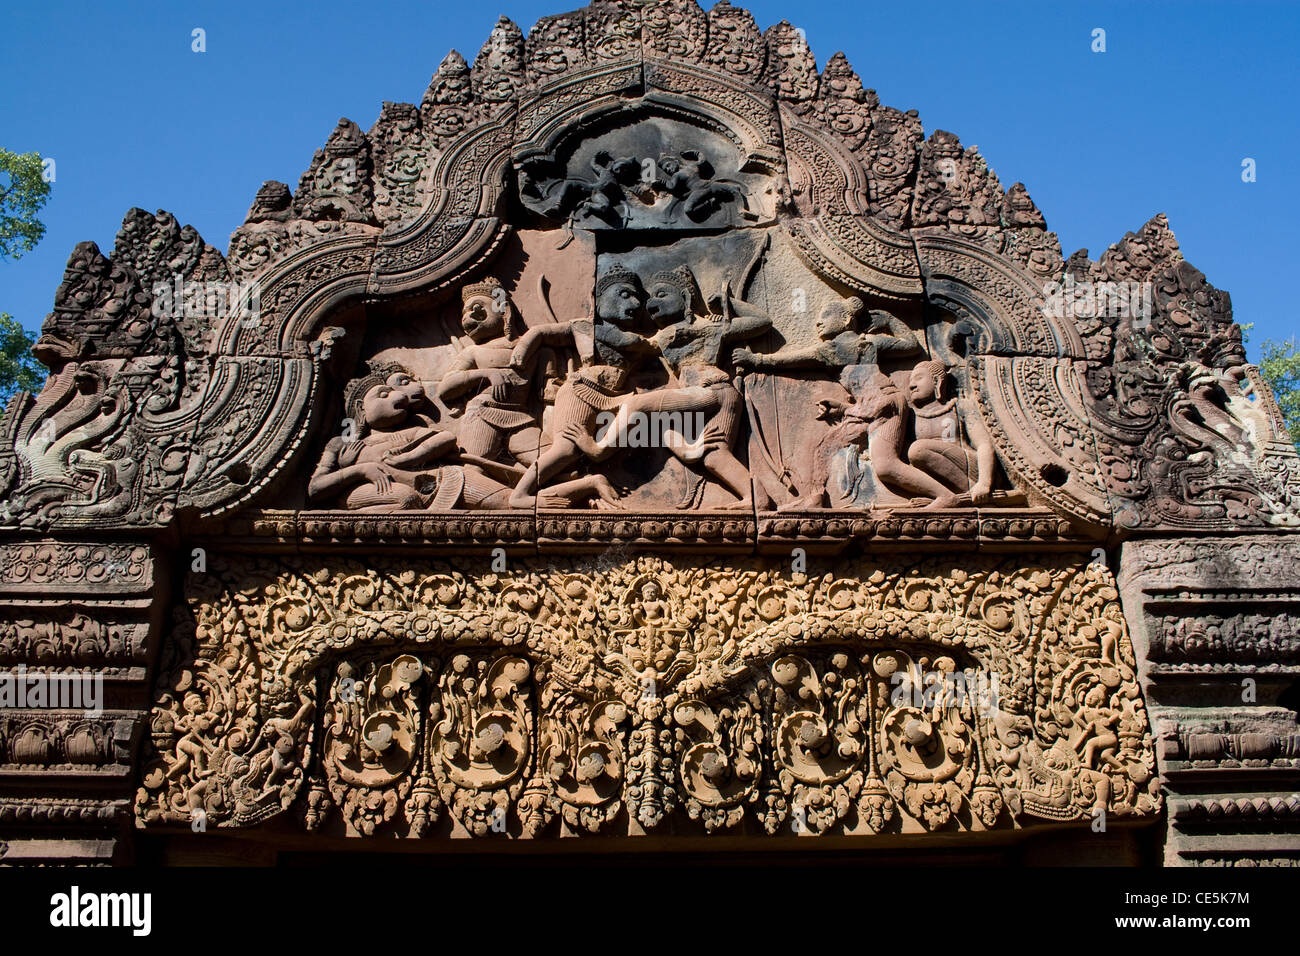 Bass reliefs at Banteay Srei temple in Angkor, Cambodia. Stock Photo